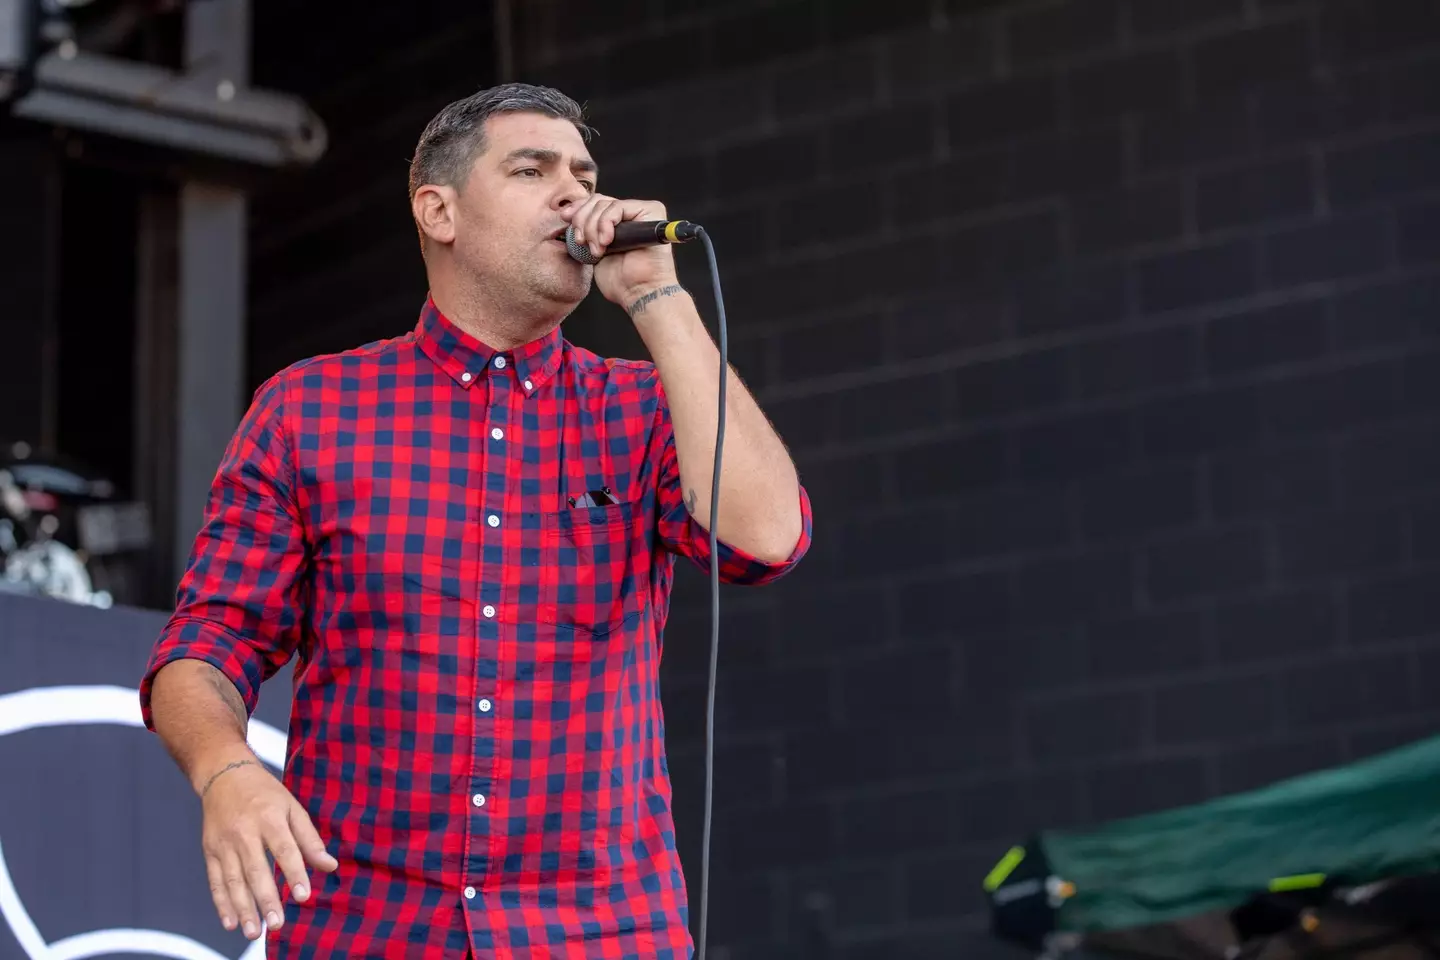 The Alien Ant Farm frontman has been charged with battery.